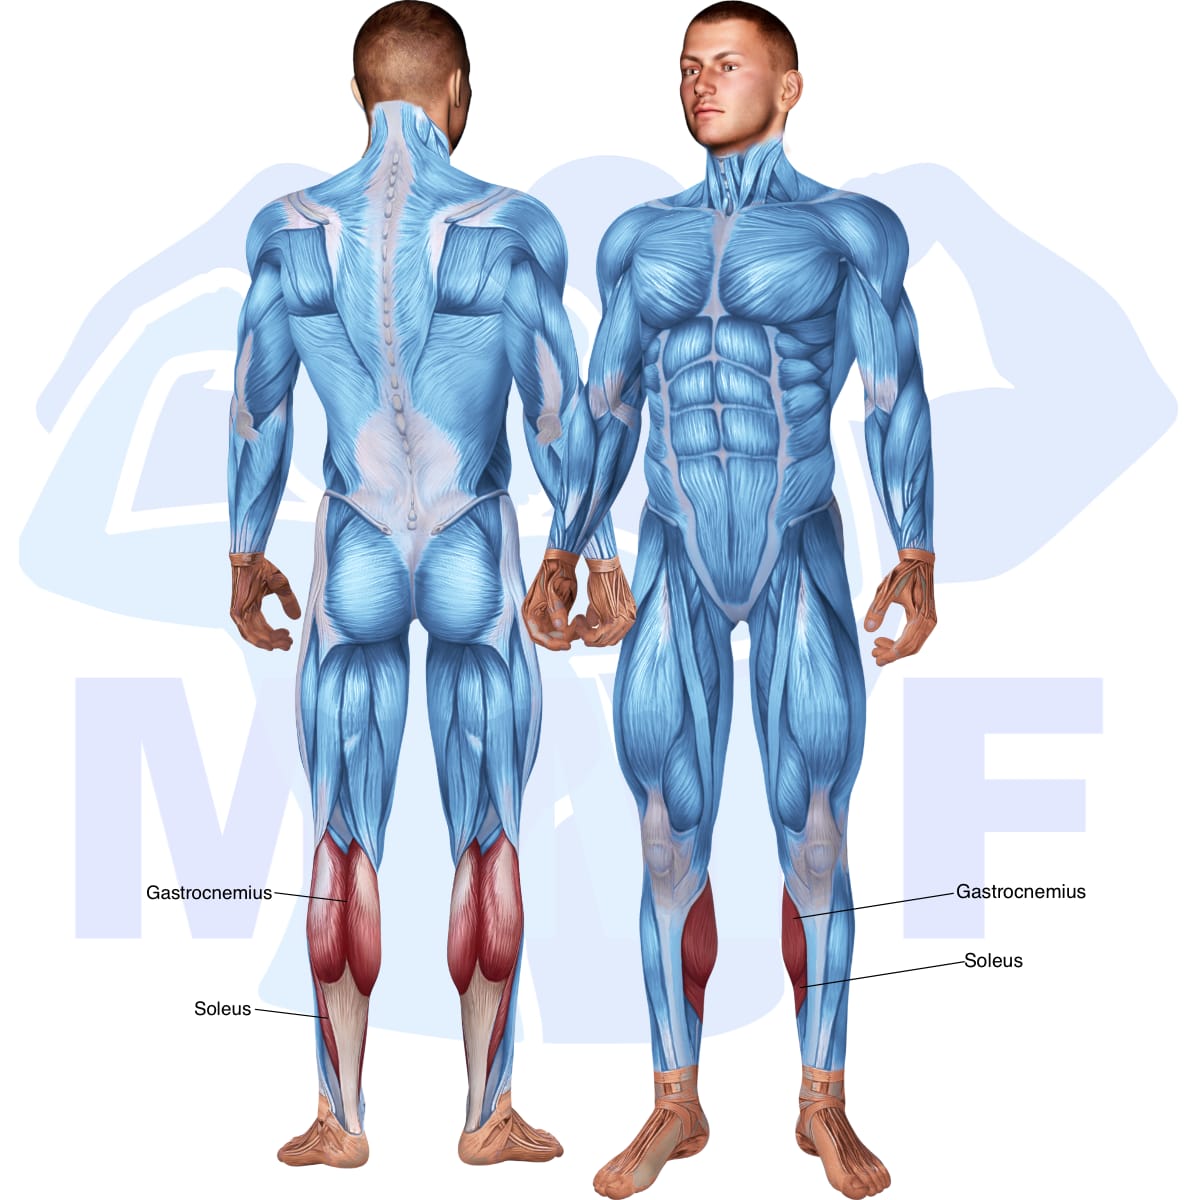 Image of the skeletal muscular system with the muscles used in the smith calf raise exercise highlighted in red and the rest in blue.